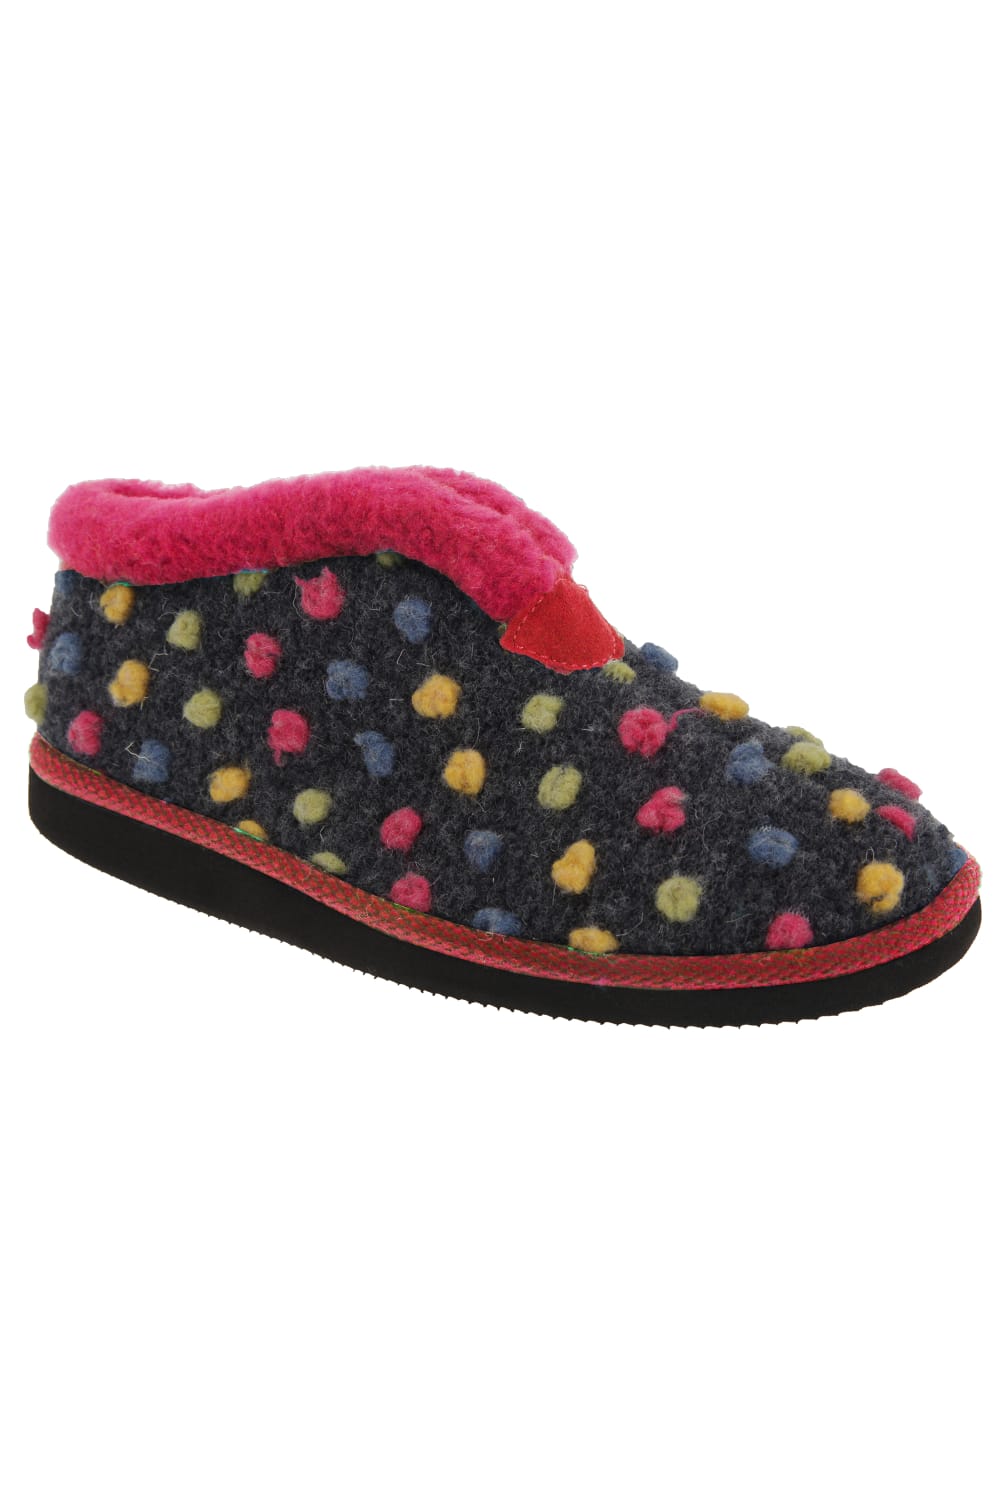 Womens/Ladies Tilly Lightweight Thermal Lined Bootee Slippers - Fuchsia/Multi